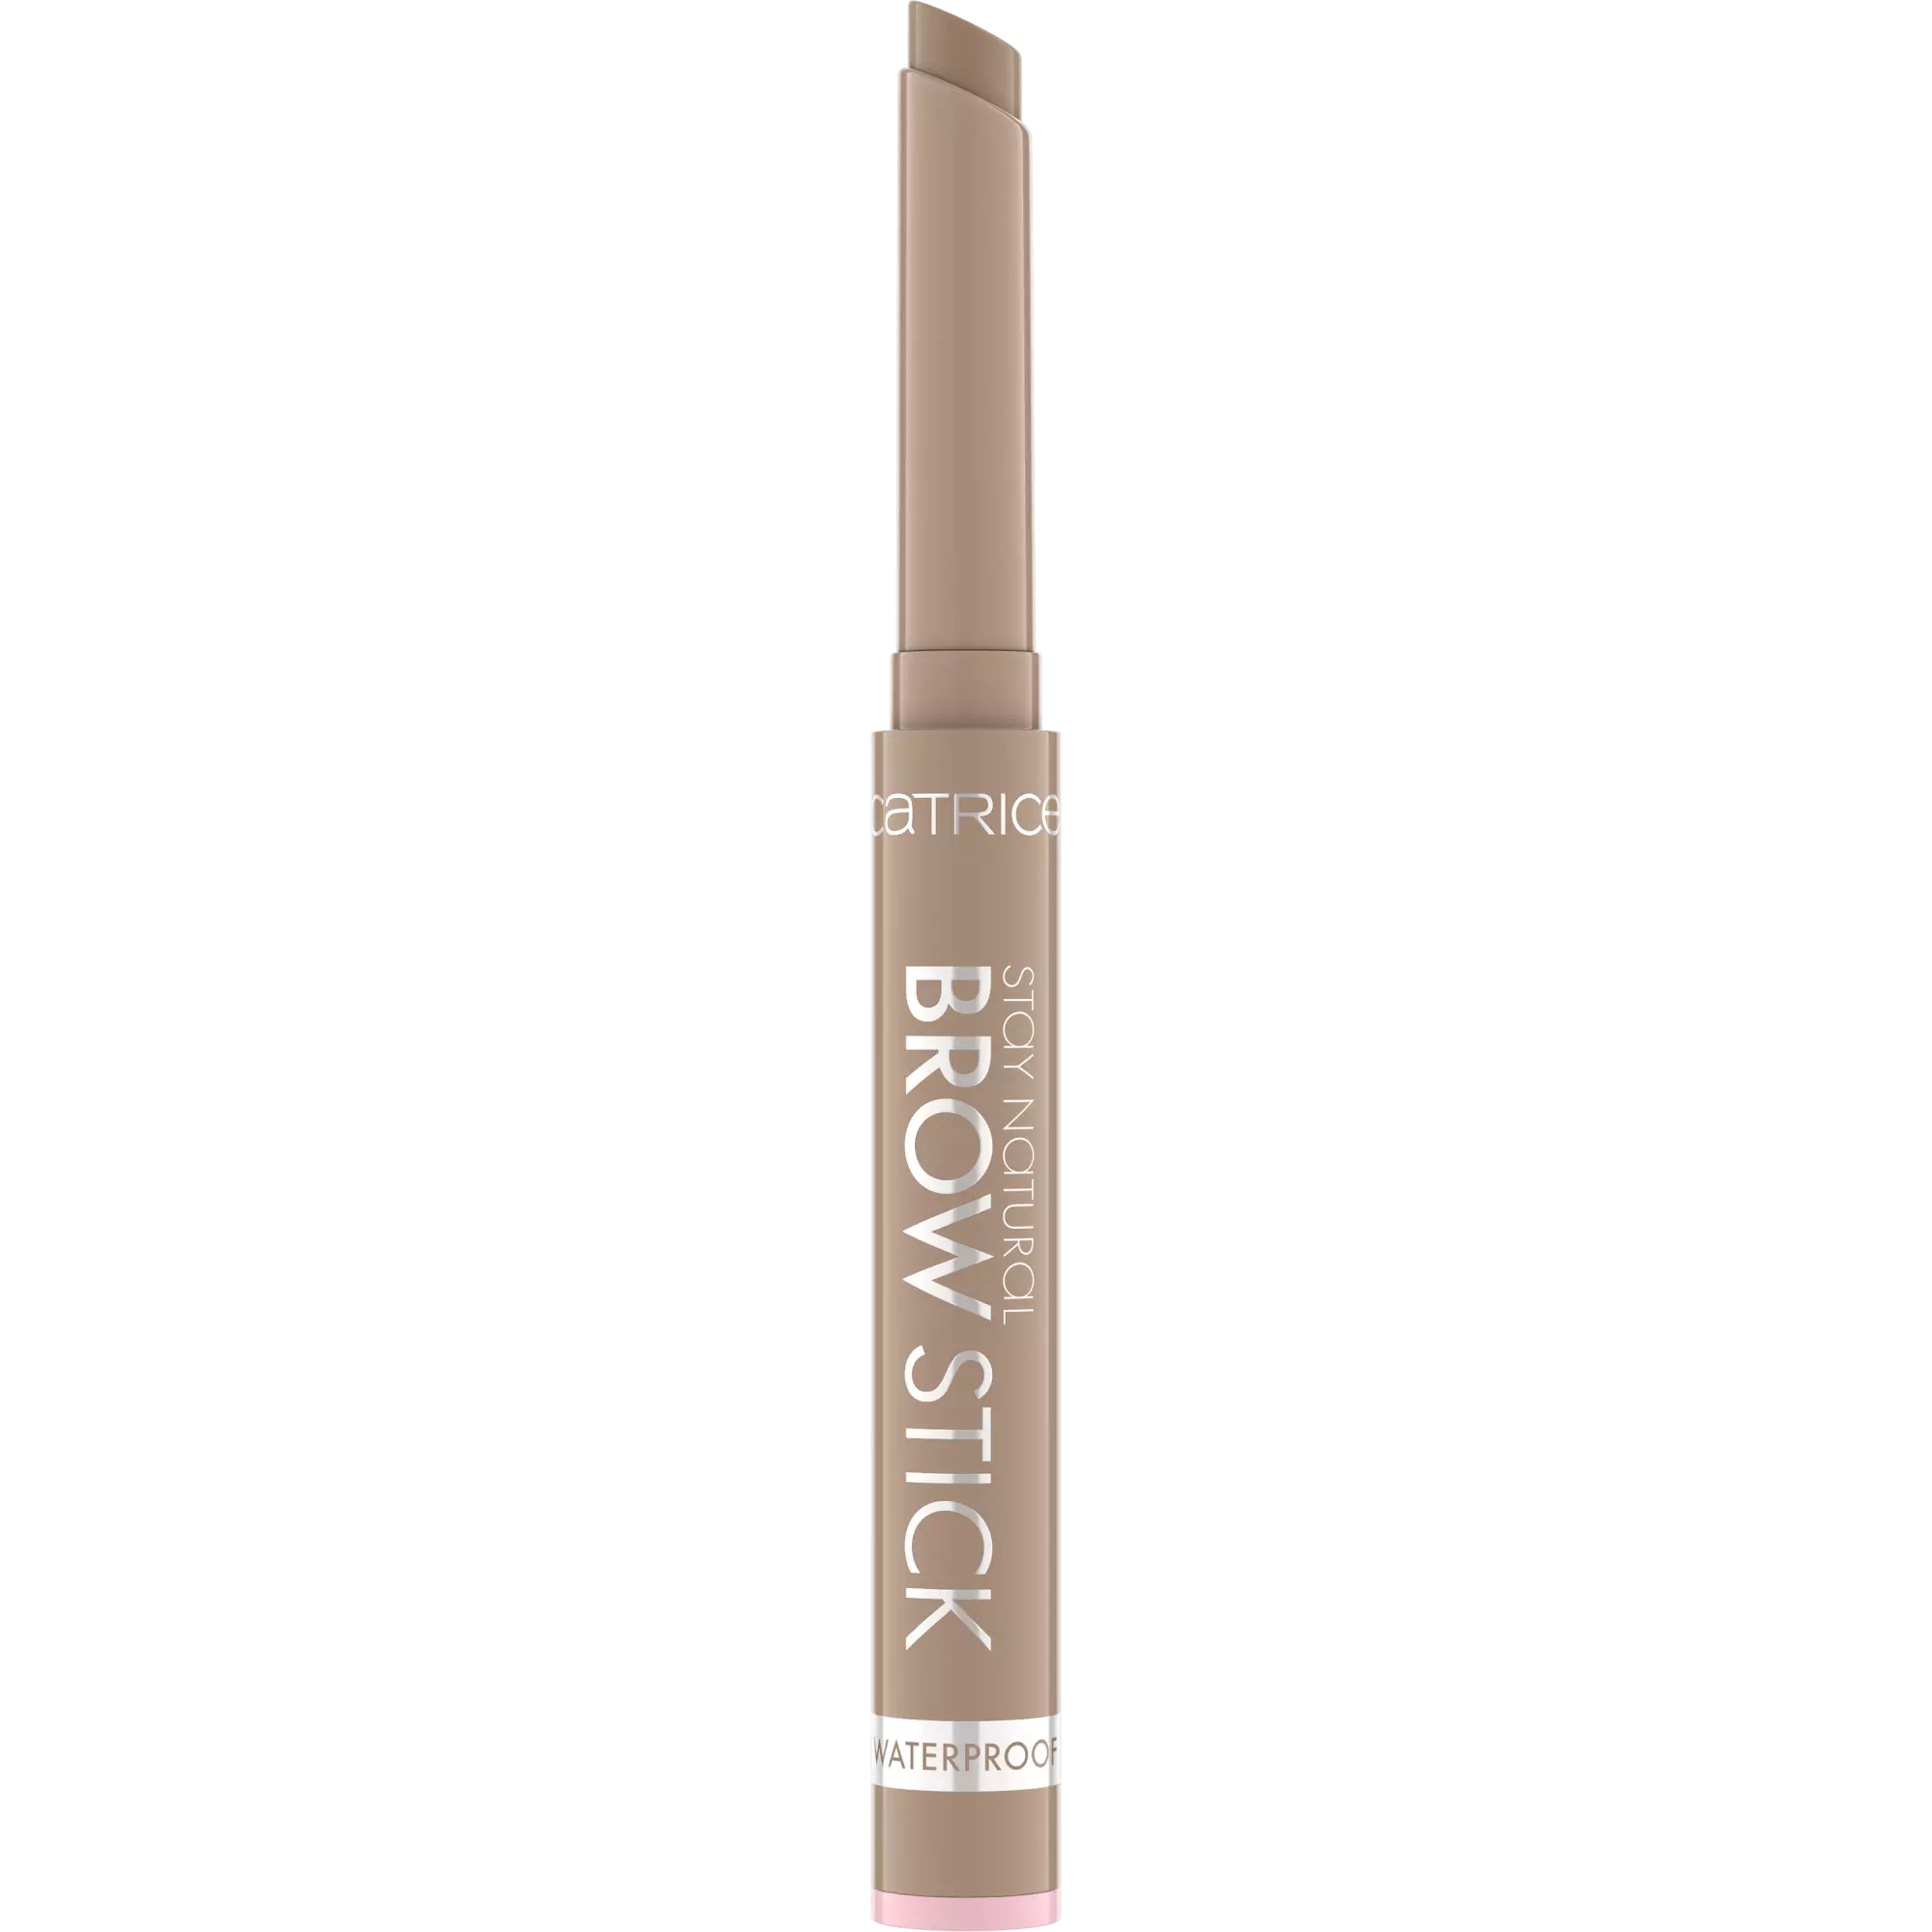 Catrice Stay Natural Brow Stick - 020 Soft Medium Brown